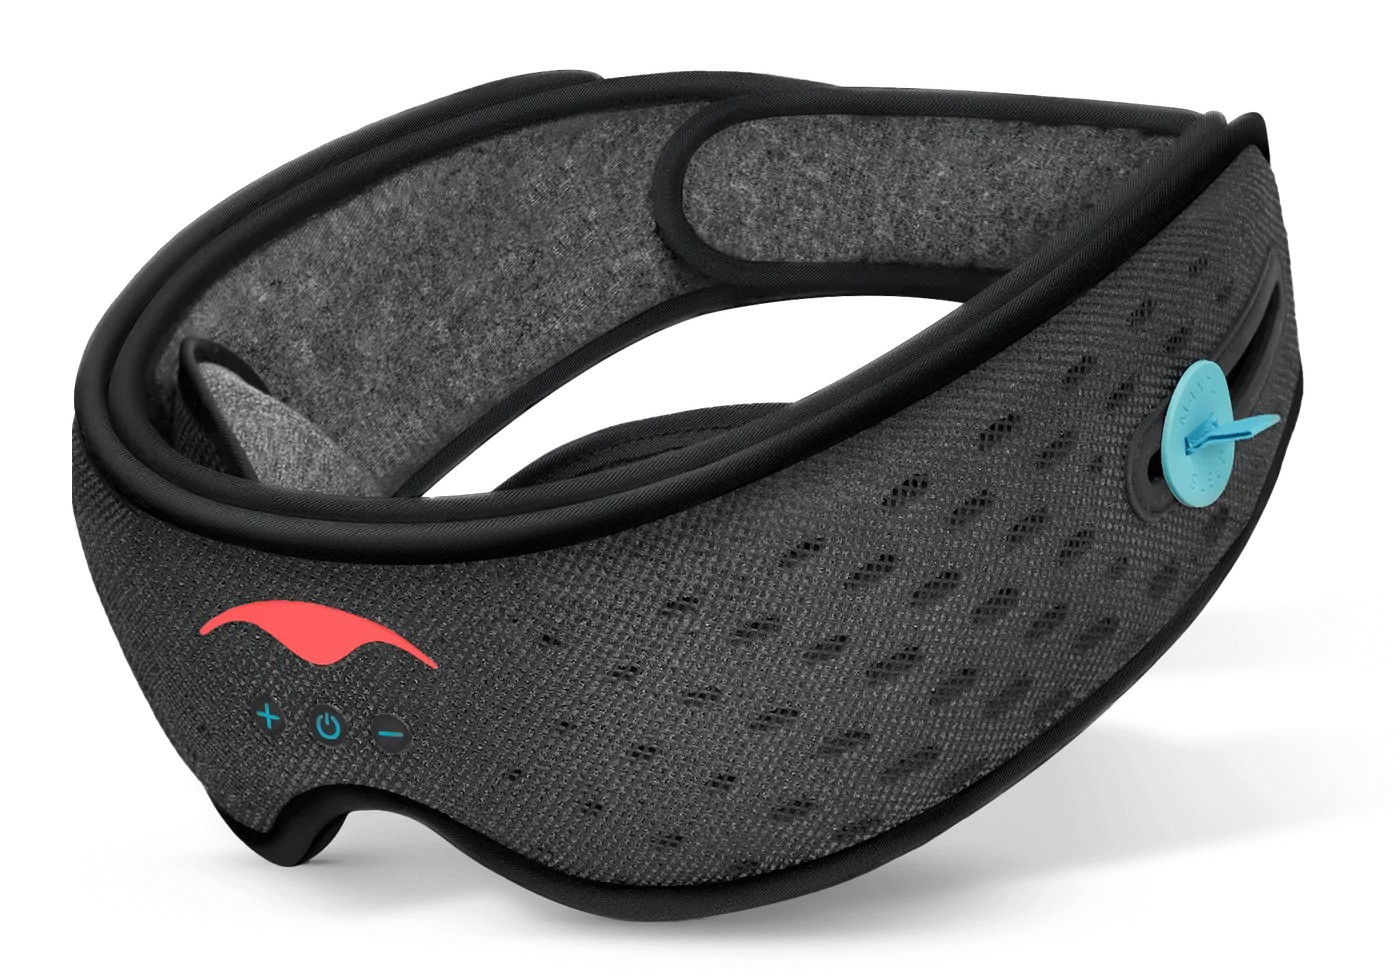 A black mesh sleep mask for men with blue tooth speakers and eye cups.